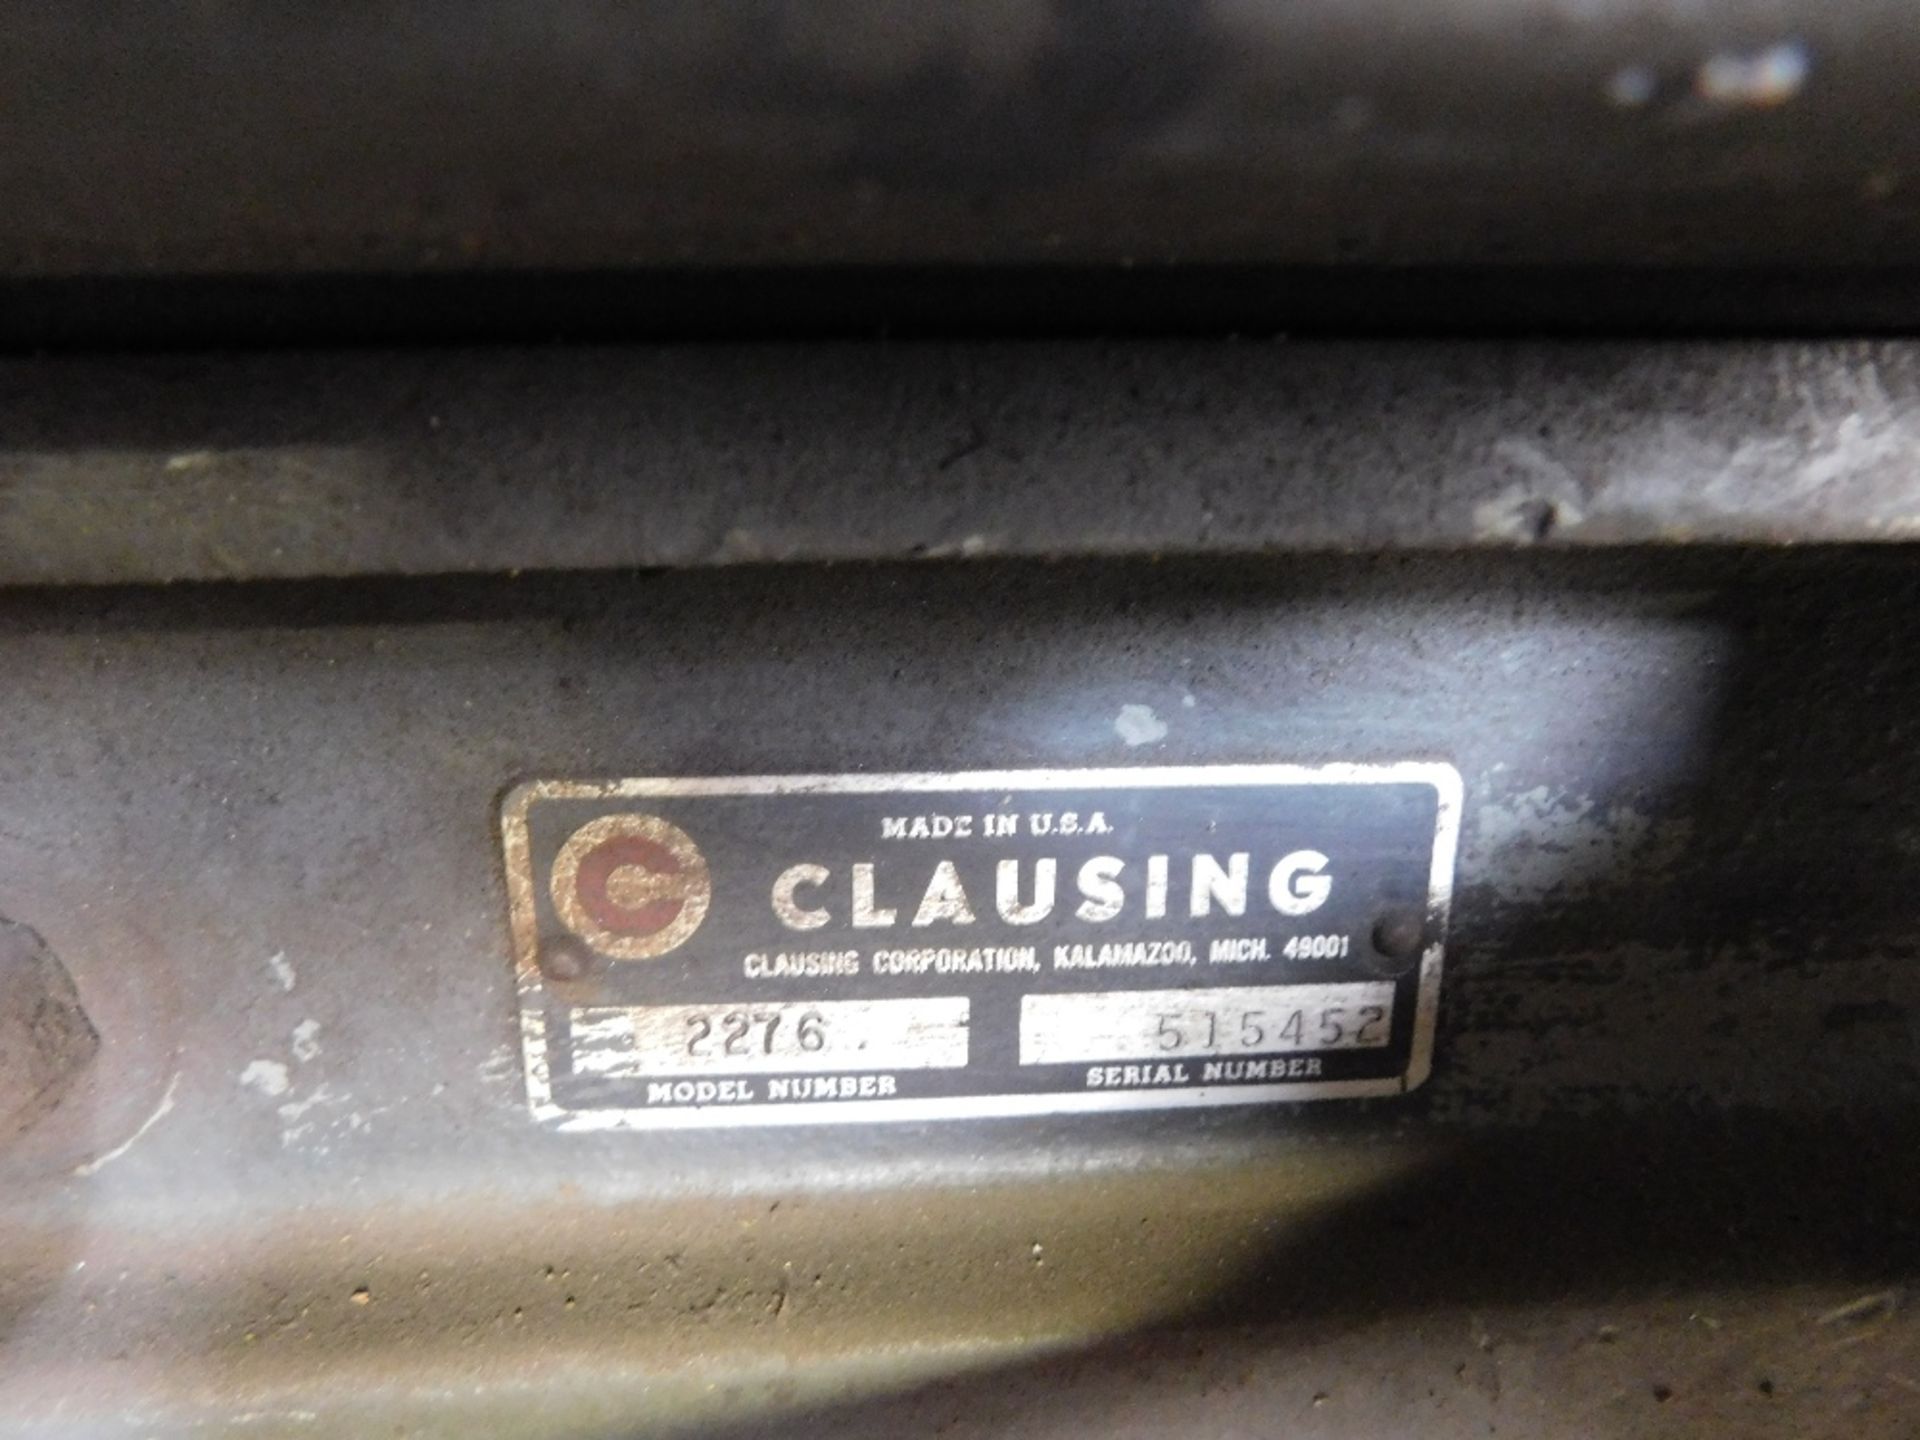 CLAUSING MODEL 2276 DRILL PRESS, S/N 515452 - Image 2 of 2